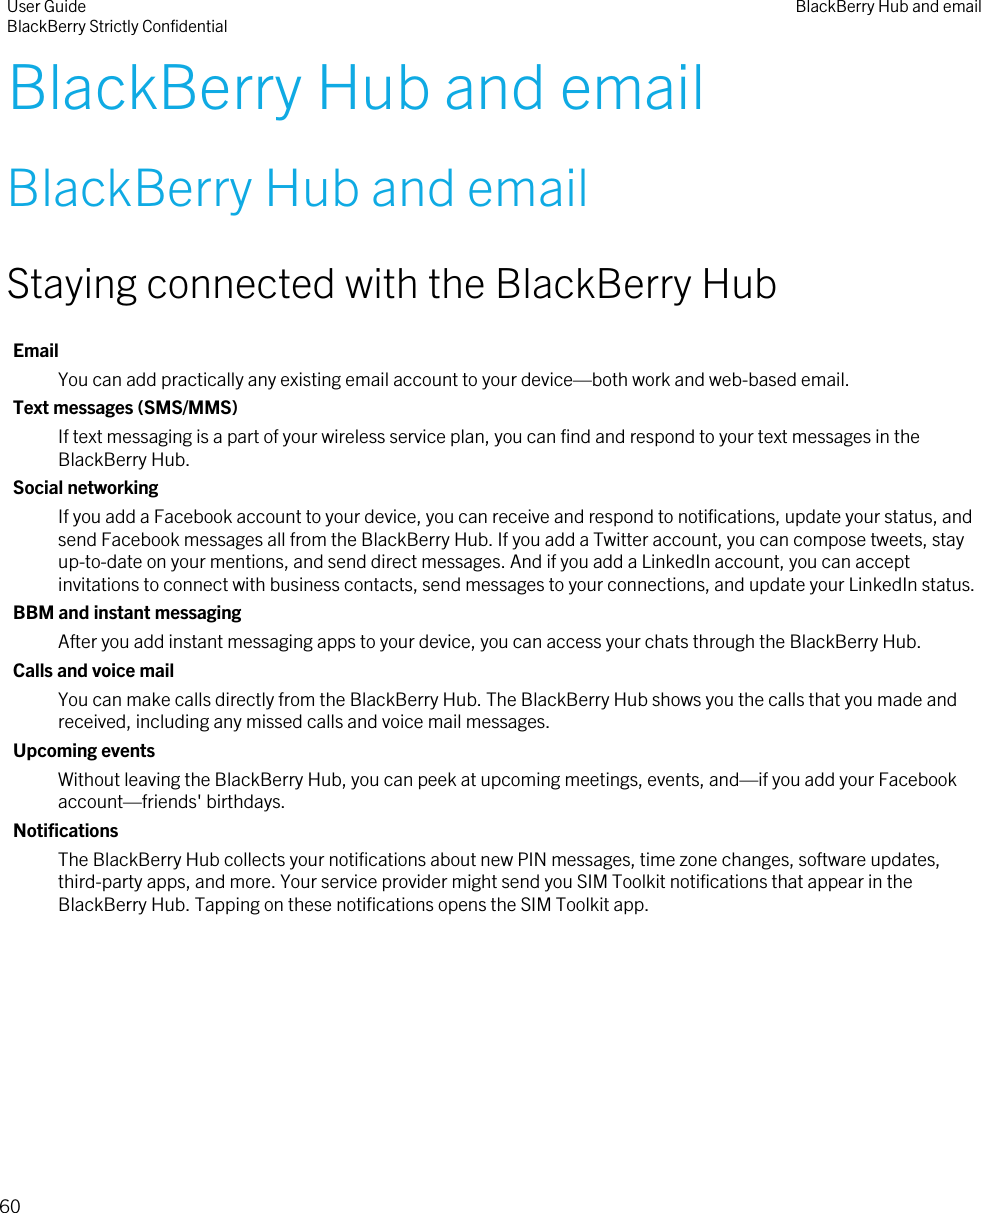 BlackBerry Hub and emailBlackBerry Hub and emailStaying connected with the BlackBerry HubEmailYou can add practically any existing email account to your device—both work and web-based email.Text messages (SMS/MMS)If text messaging is a part of your wireless service plan, you can find and respond to your text messages in the BlackBerry Hub.Social networkingIf you add a Facebook account to your device, you can receive and respond to notifications, update your status, and send Facebook messages all from the BlackBerry Hub. If you add a Twitter account, you can compose tweets, stay up-to-date on your mentions, and send direct messages. And if you add a LinkedIn account, you can accept invitations to connect with business contacts, send messages to your connections, and update your LinkedIn status.BBM and instant messagingAfter you add instant messaging apps to your device, you can access your chats through the BlackBerry Hub.Calls and voice mailYou can make calls directly from the BlackBerry Hub. The BlackBerry Hub shows you the calls that you made and received, including any missed calls and voice mail messages.Upcoming eventsWithout leaving the BlackBerry Hub, you can peek at upcoming meetings, events, and—if you add your Facebook account—friends&apos; birthdays.NotificationsThe BlackBerry Hub collects your notifications about new PIN messages, time zone changes, software updates, third-party apps, and more. Your service provider might send you SIM Toolkit notifications that appear in the BlackBerry Hub. Tapping on these notifications opens the SIM Toolkit app.User GuideBlackBerry Strictly Confidential BlackBerry Hub and email60